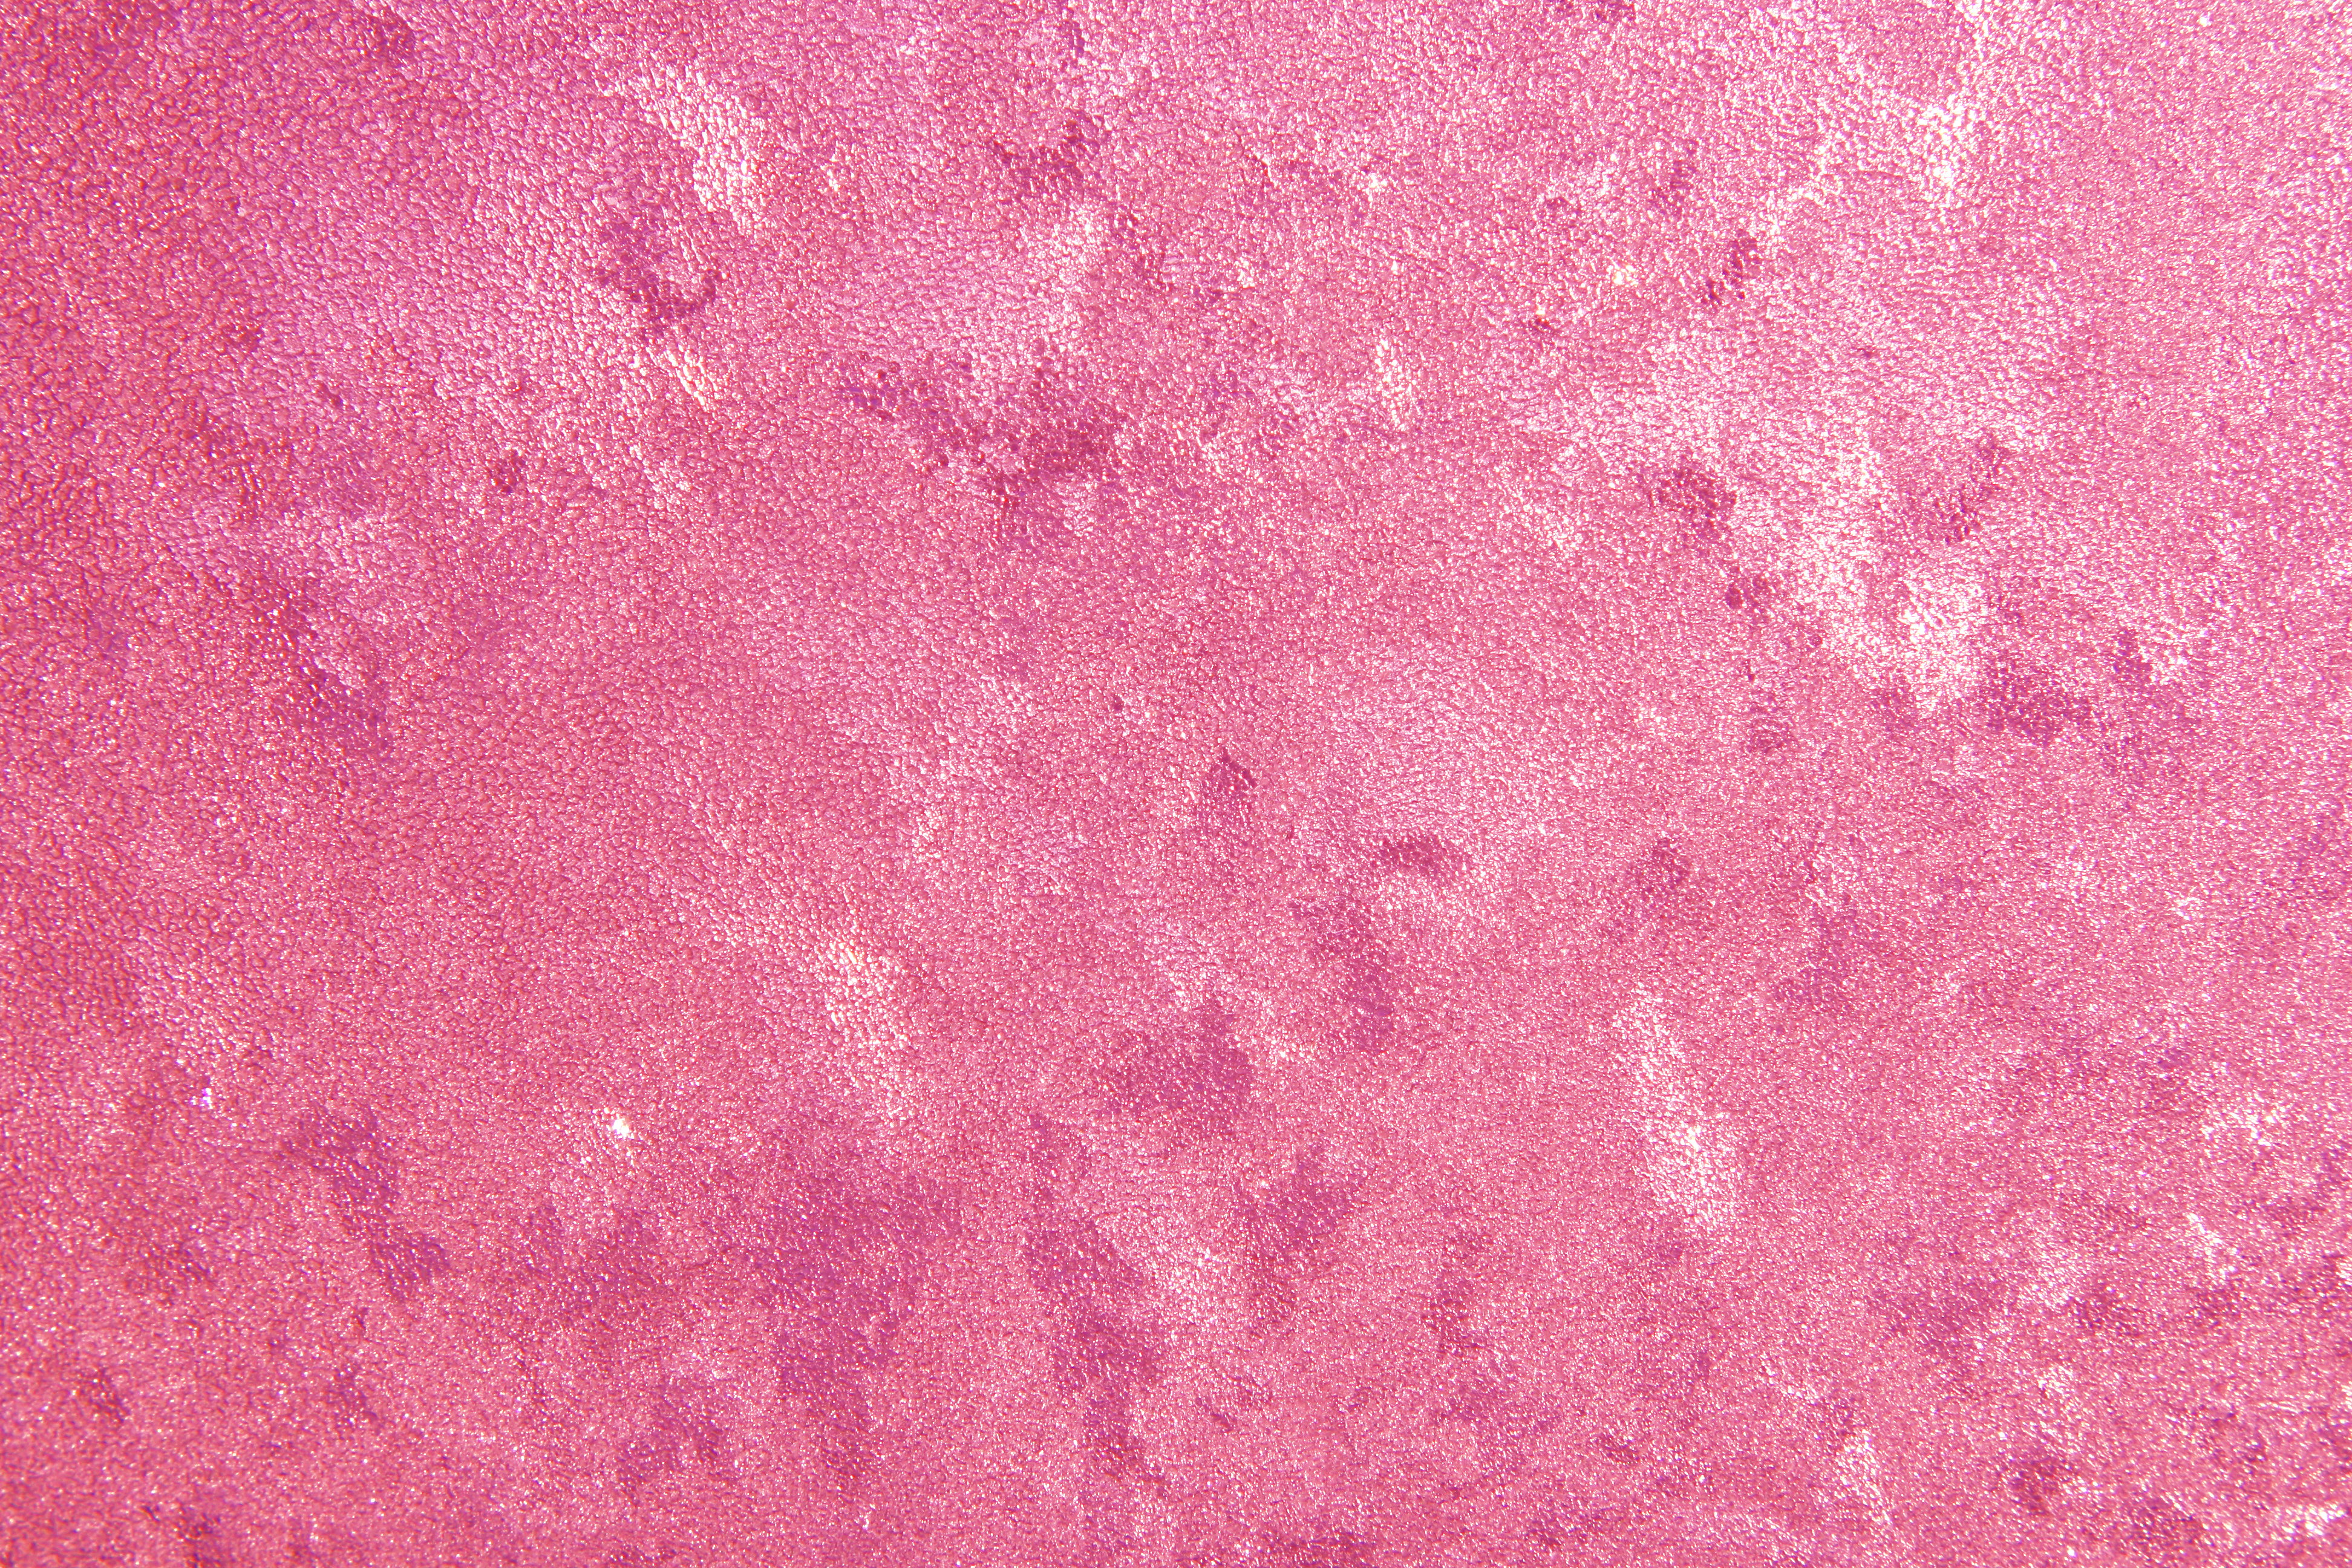 frost on glass close up texture colorized pink